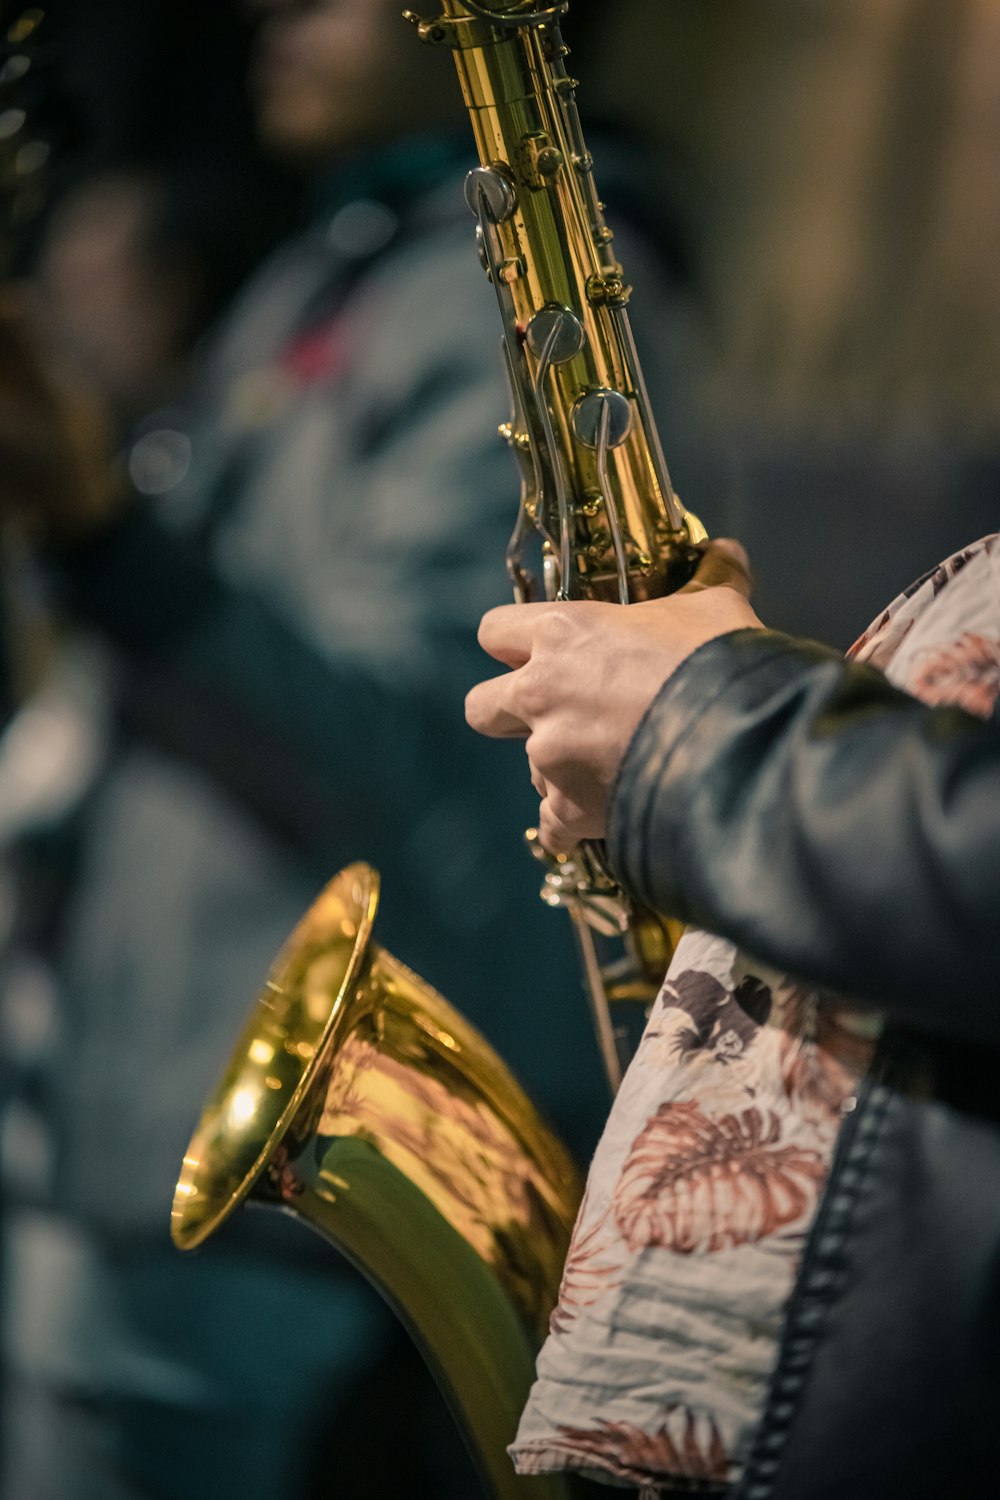 a close up of a person playing a saxophone